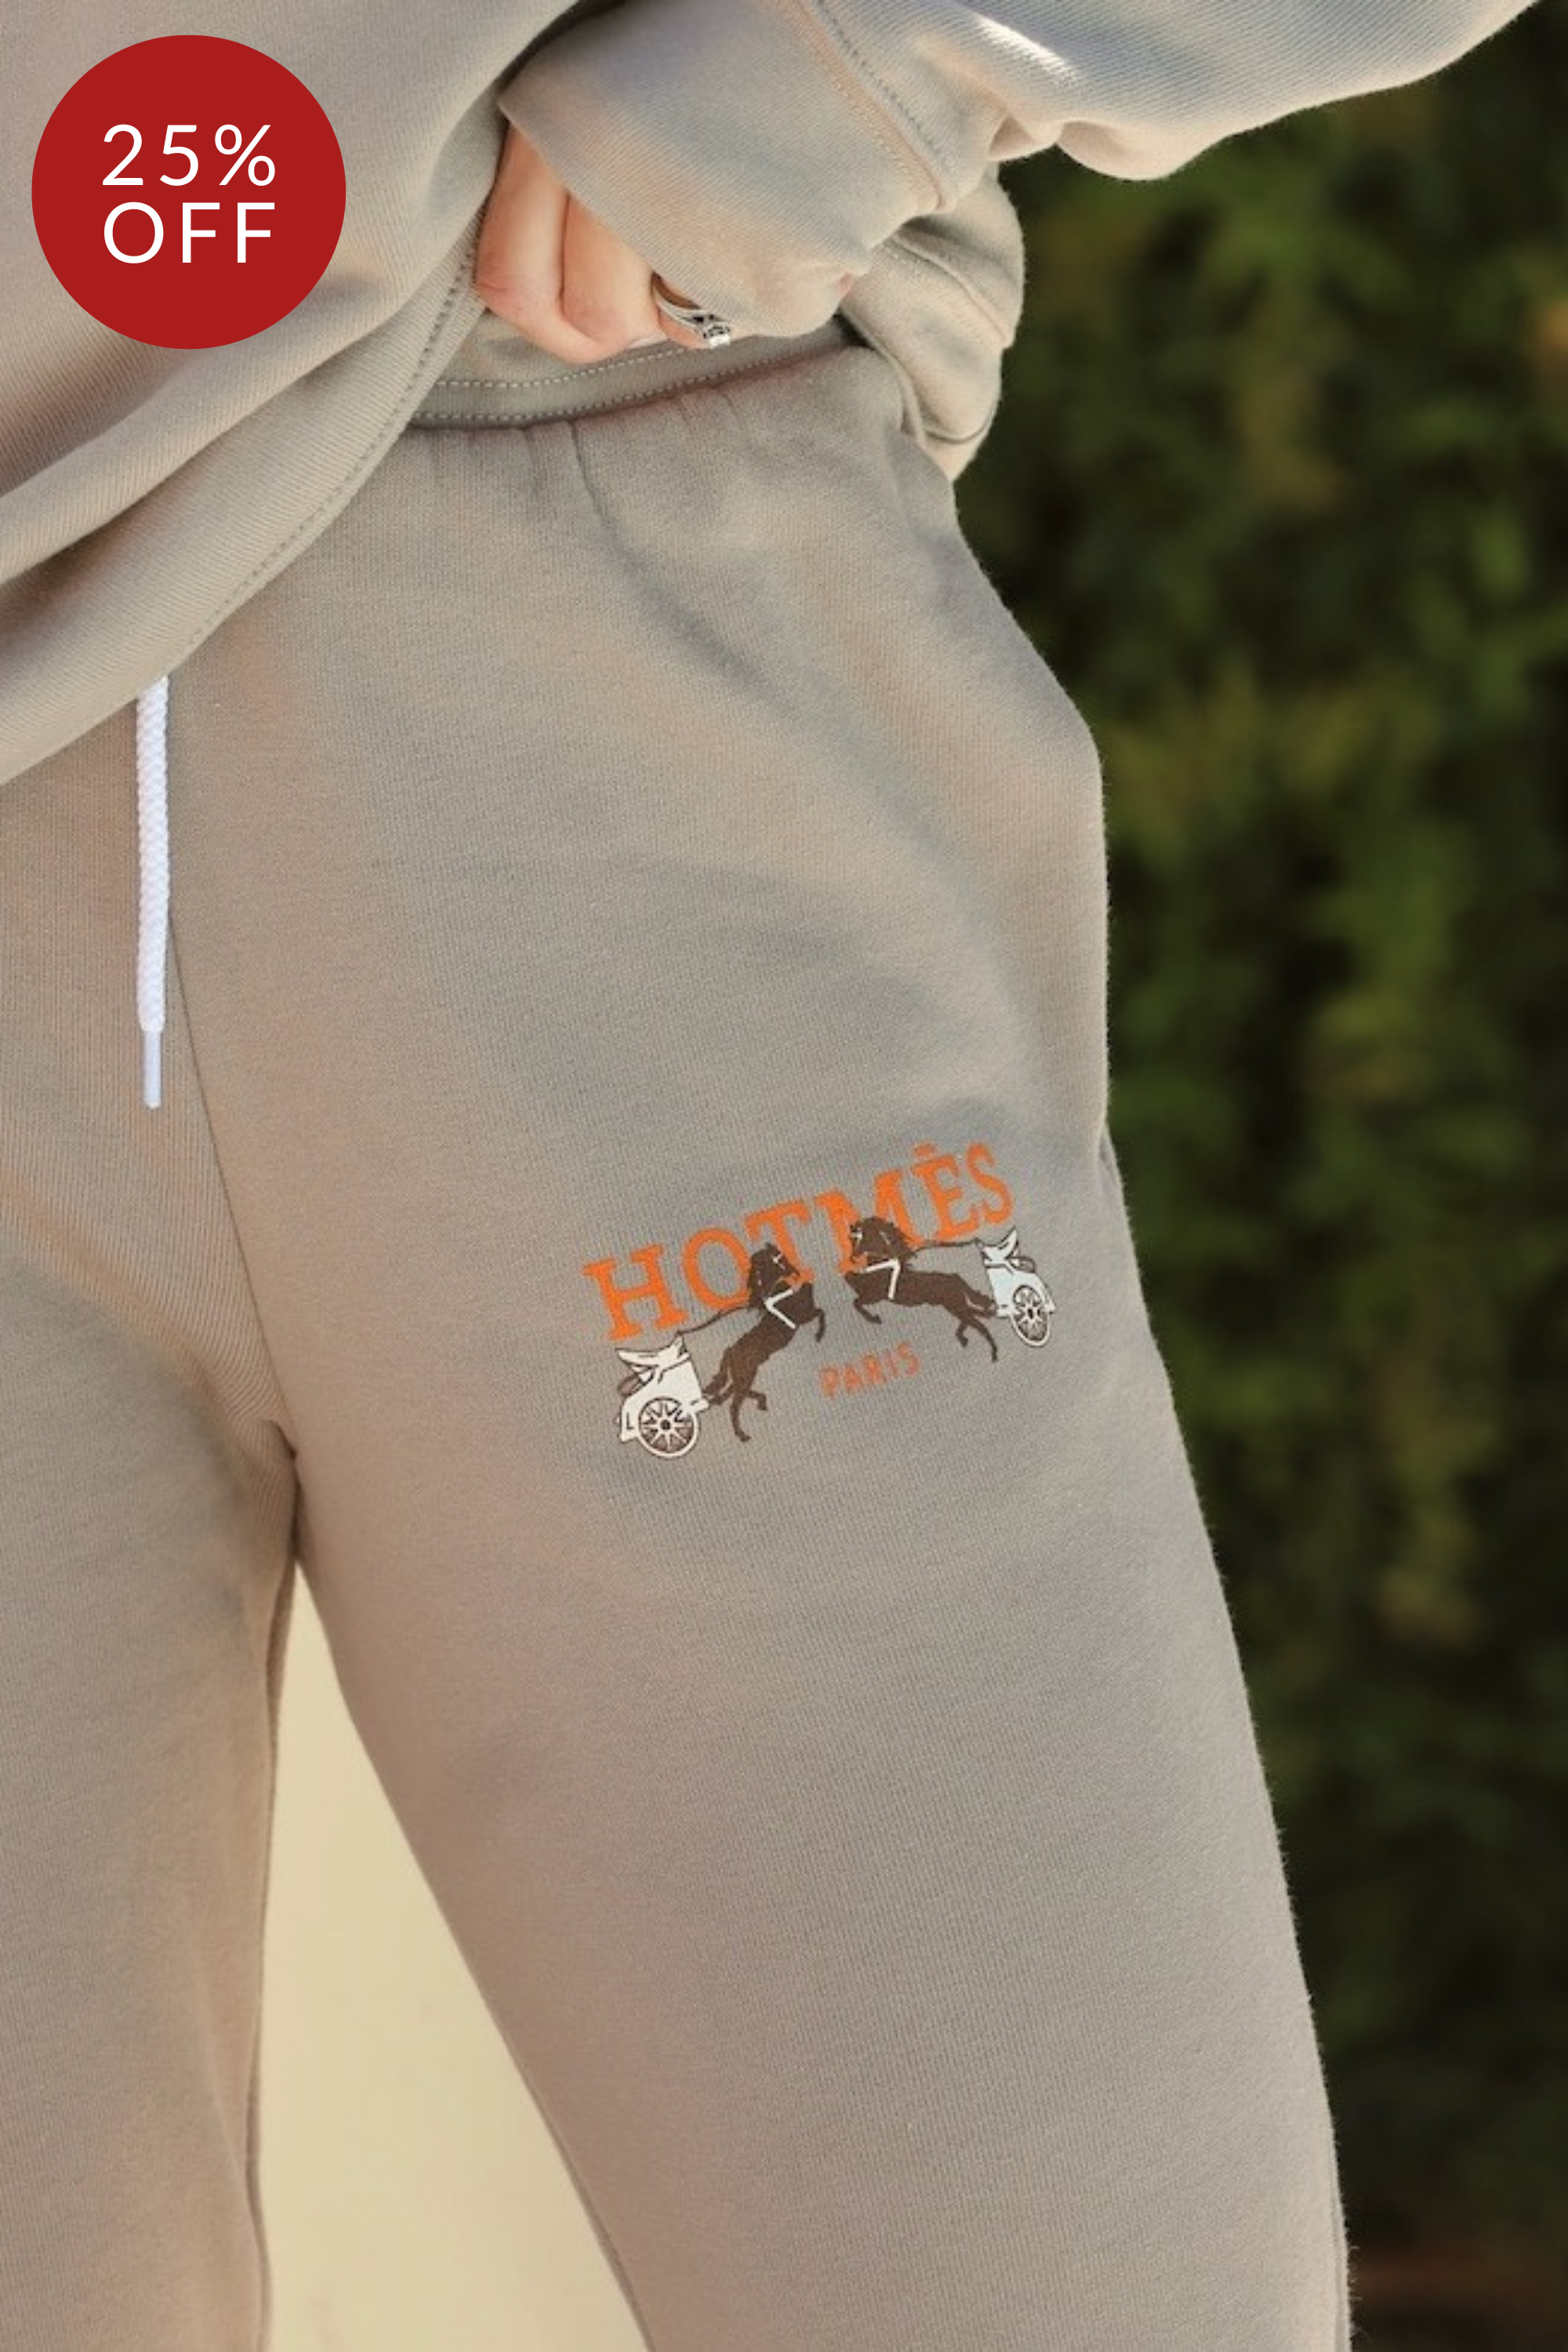 Roots, Bottoms, Roots Girl Sweatpants Joggers